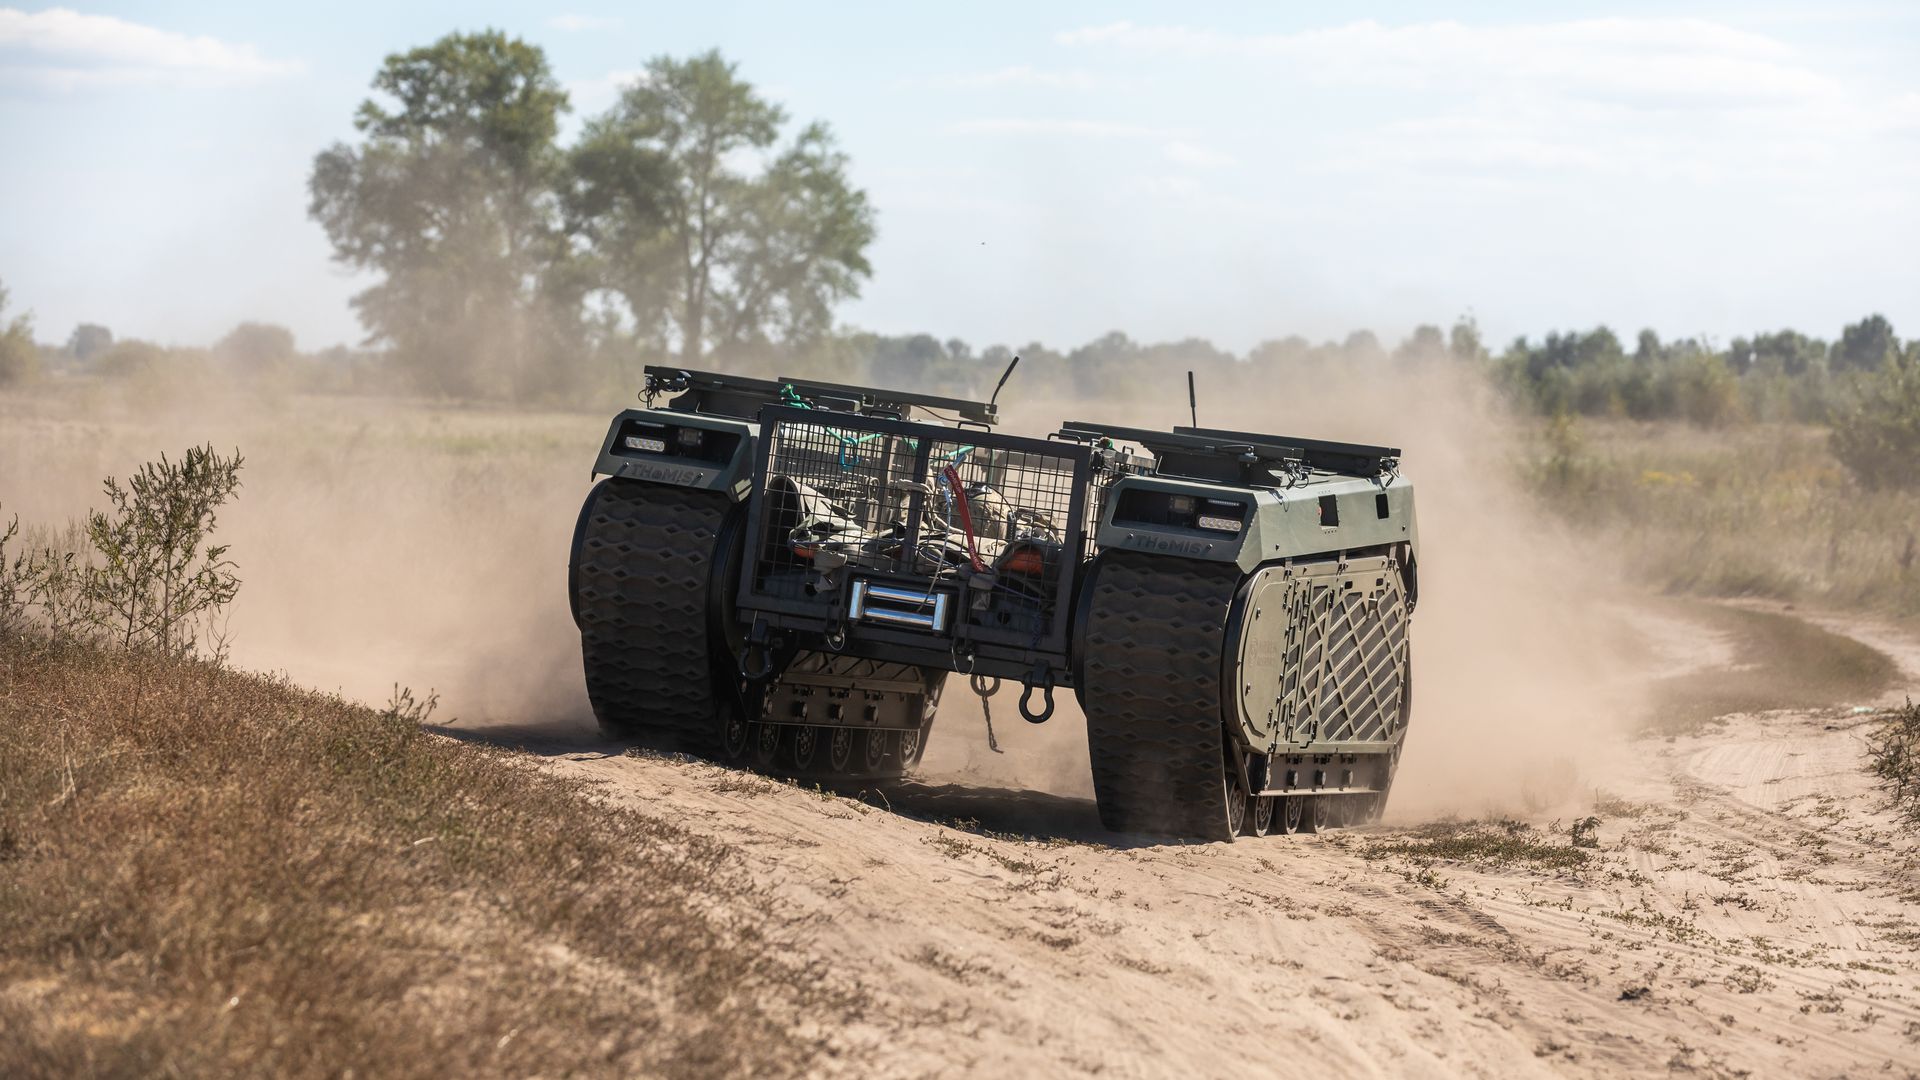 A THeMIS multi-purpose tracked unmanned ground vehicle is seen on a dusty road while carrying a wounded fighter during the field tests.